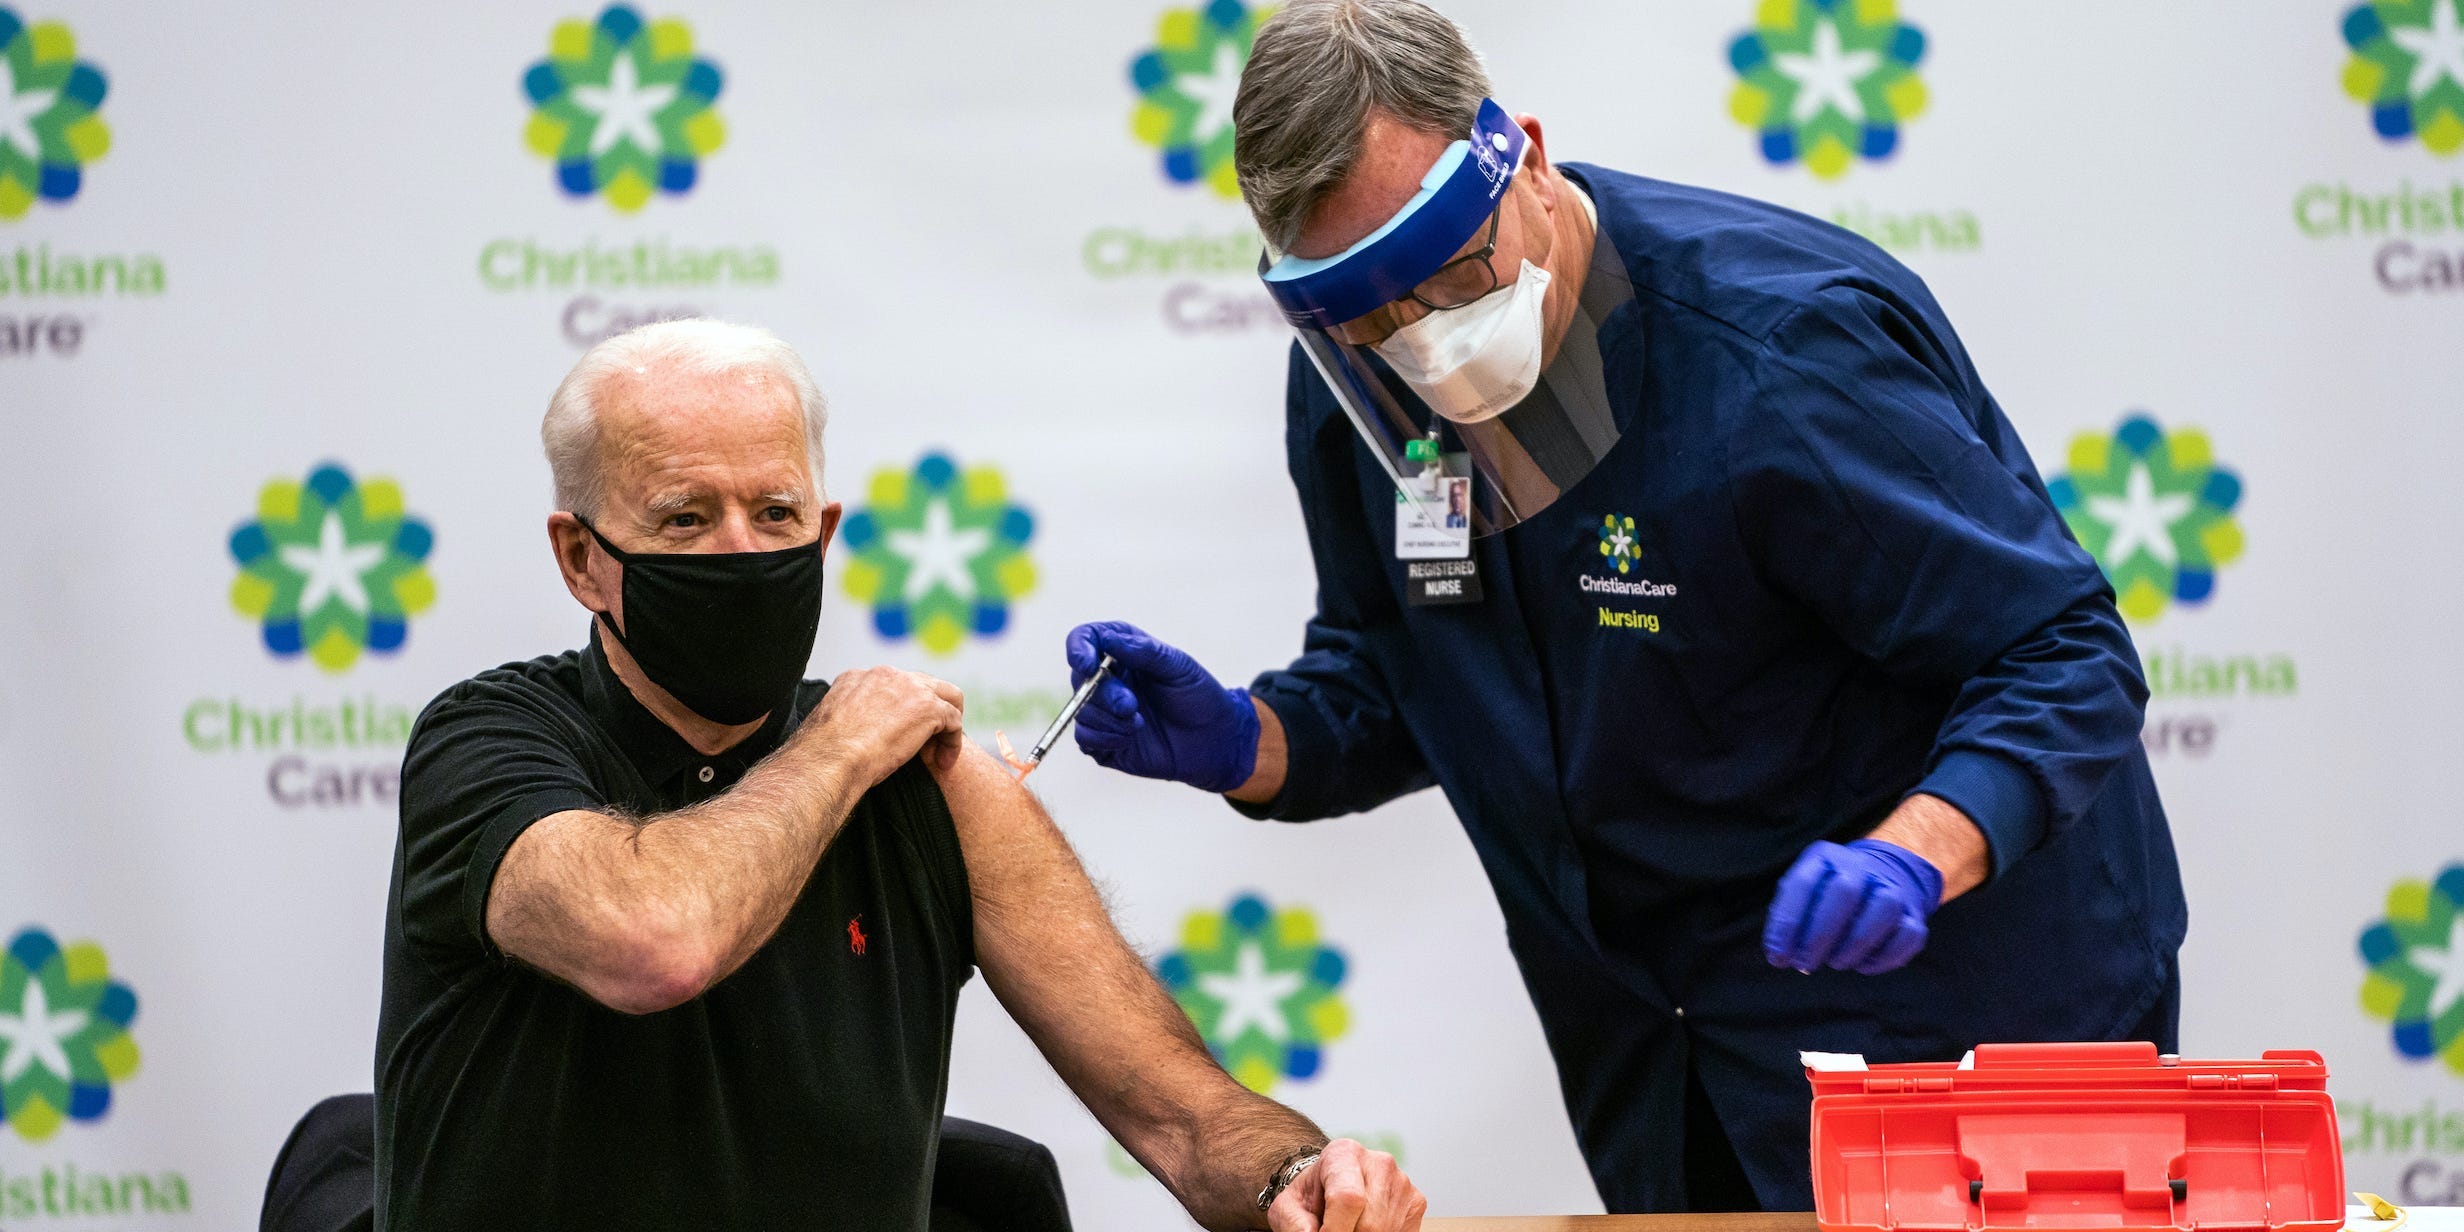 Joe Biden receives the second dose Covid-19 vaccination shot at the ChristianaCare Hospital in Newark, DE on January 11, 2021.